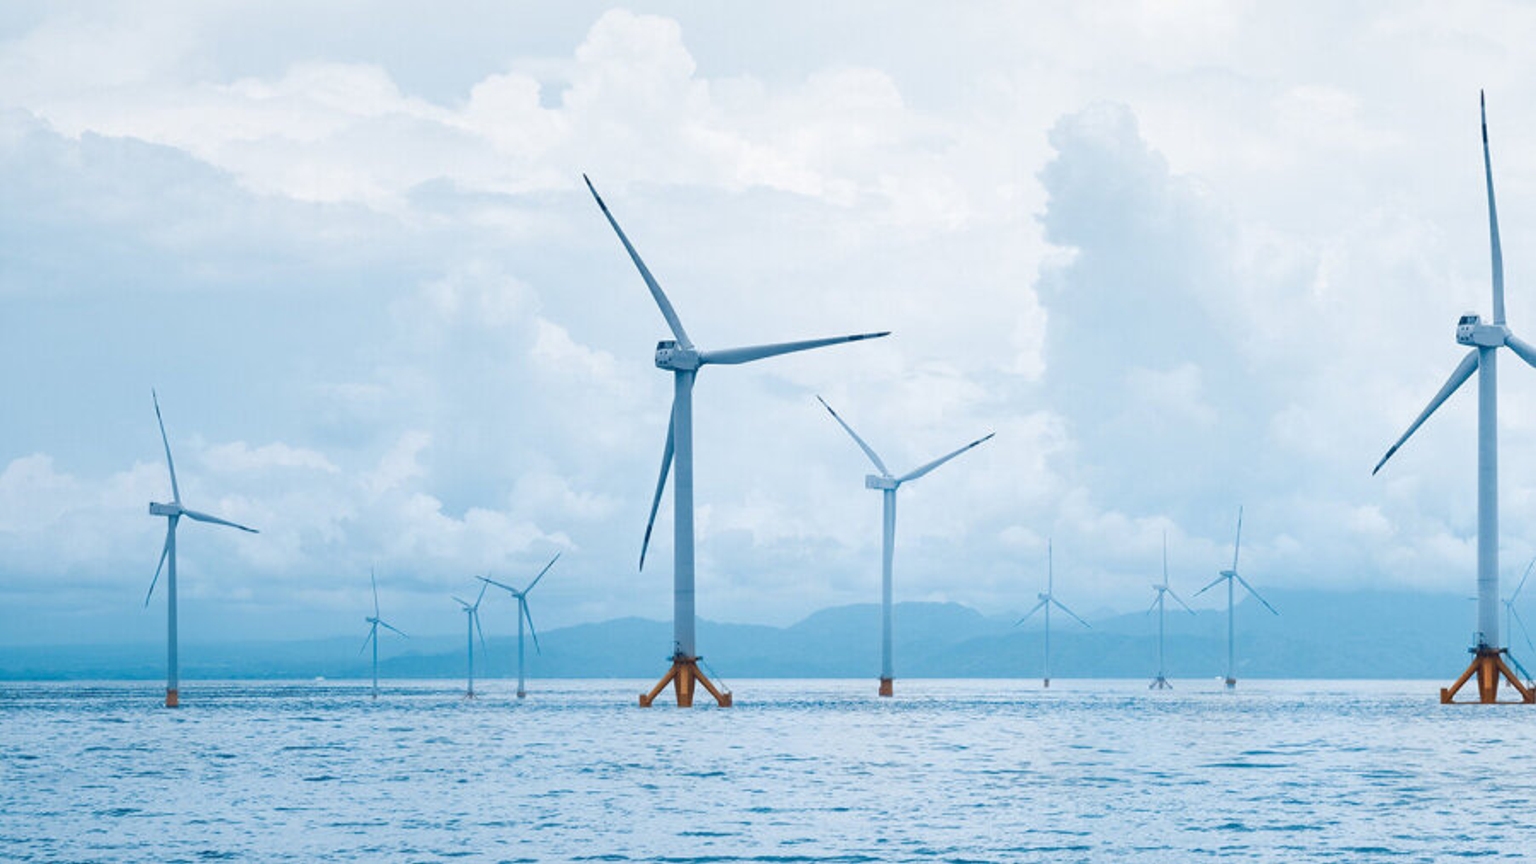 Norway is launching the world's largest floating wind farm - Hywind Tampen - offshore Wind